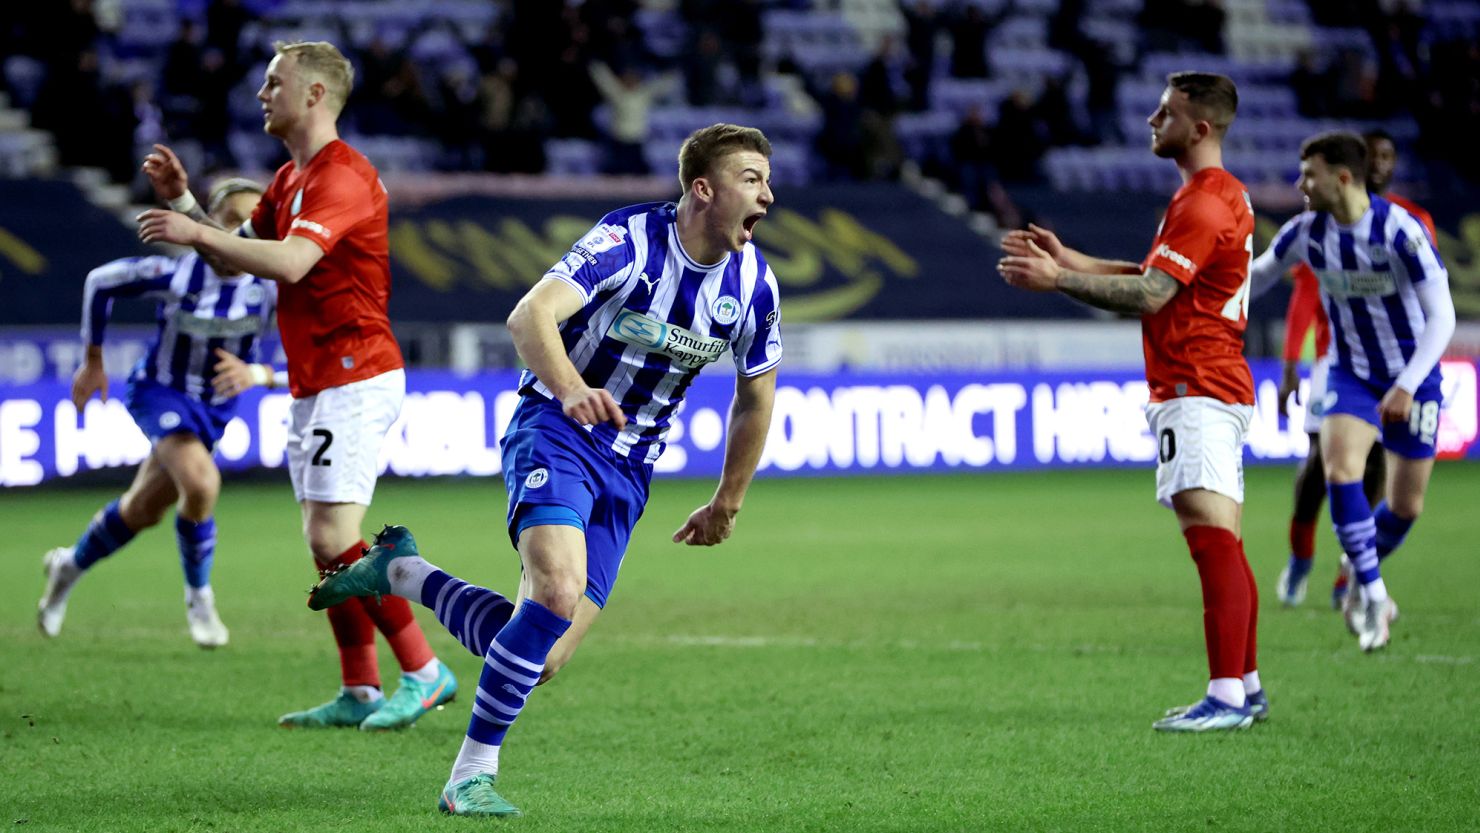 WIGAN, ENGLAND - JANUARY 23: Charlie Hughes of Wigan Athletic celebrates scoring his team's first goal during the Sky Bet League One match between Wigan Athletic and Wycombe Wanderers at DW Stadium on January 23, 2024 in Wigan, England. (Photo by Clive Brunskill/Getty Images)